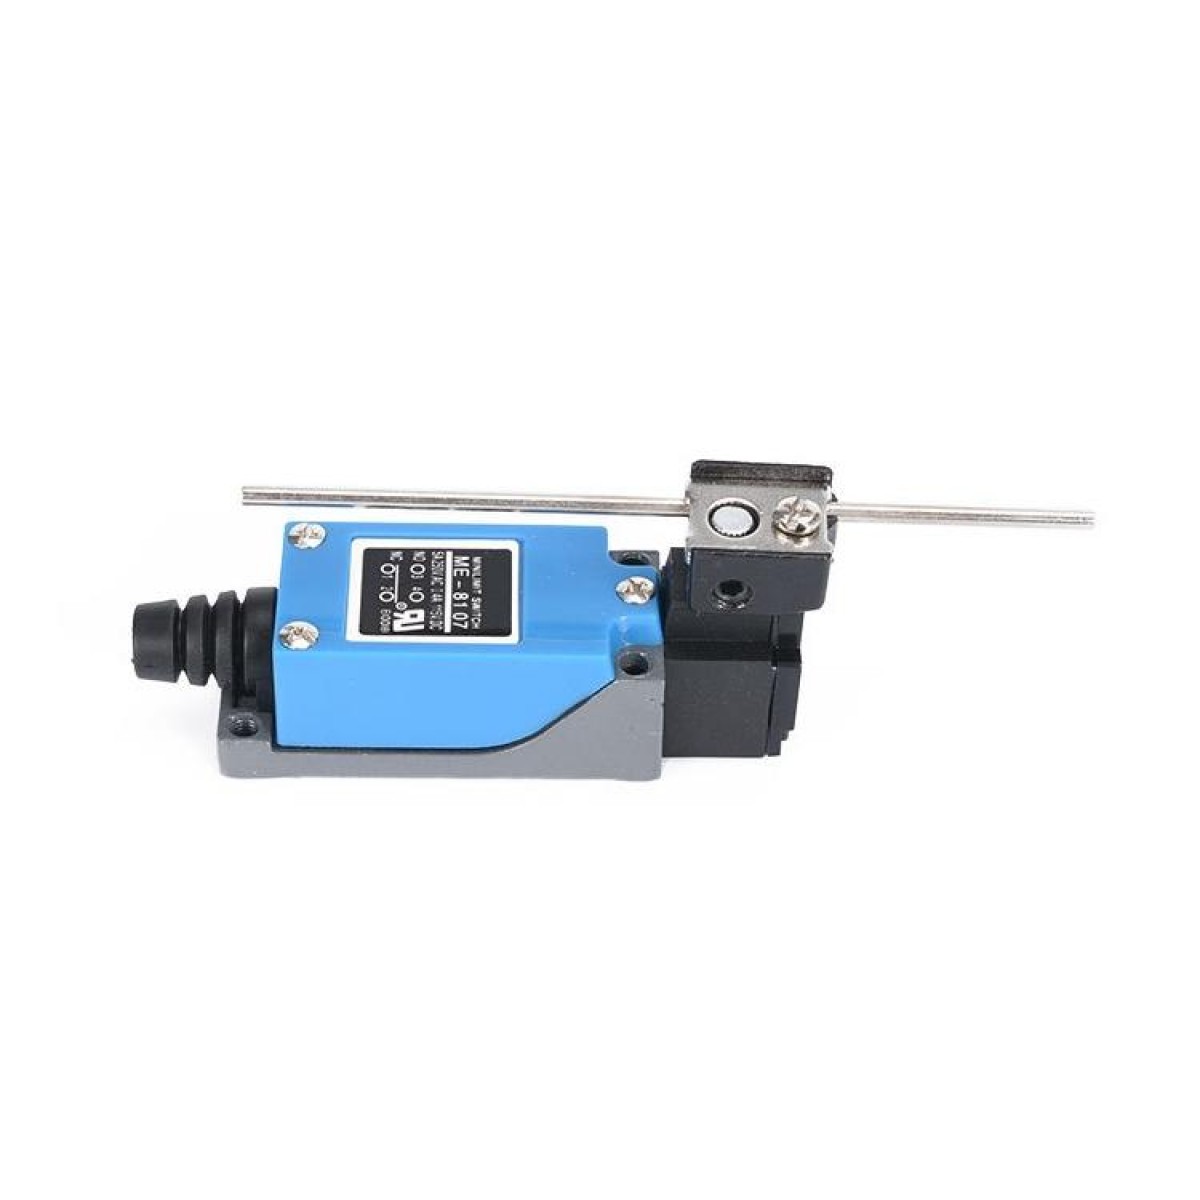 Electrical Rotary 90 Degree Lever Limit Switch ME-8107(Blue)